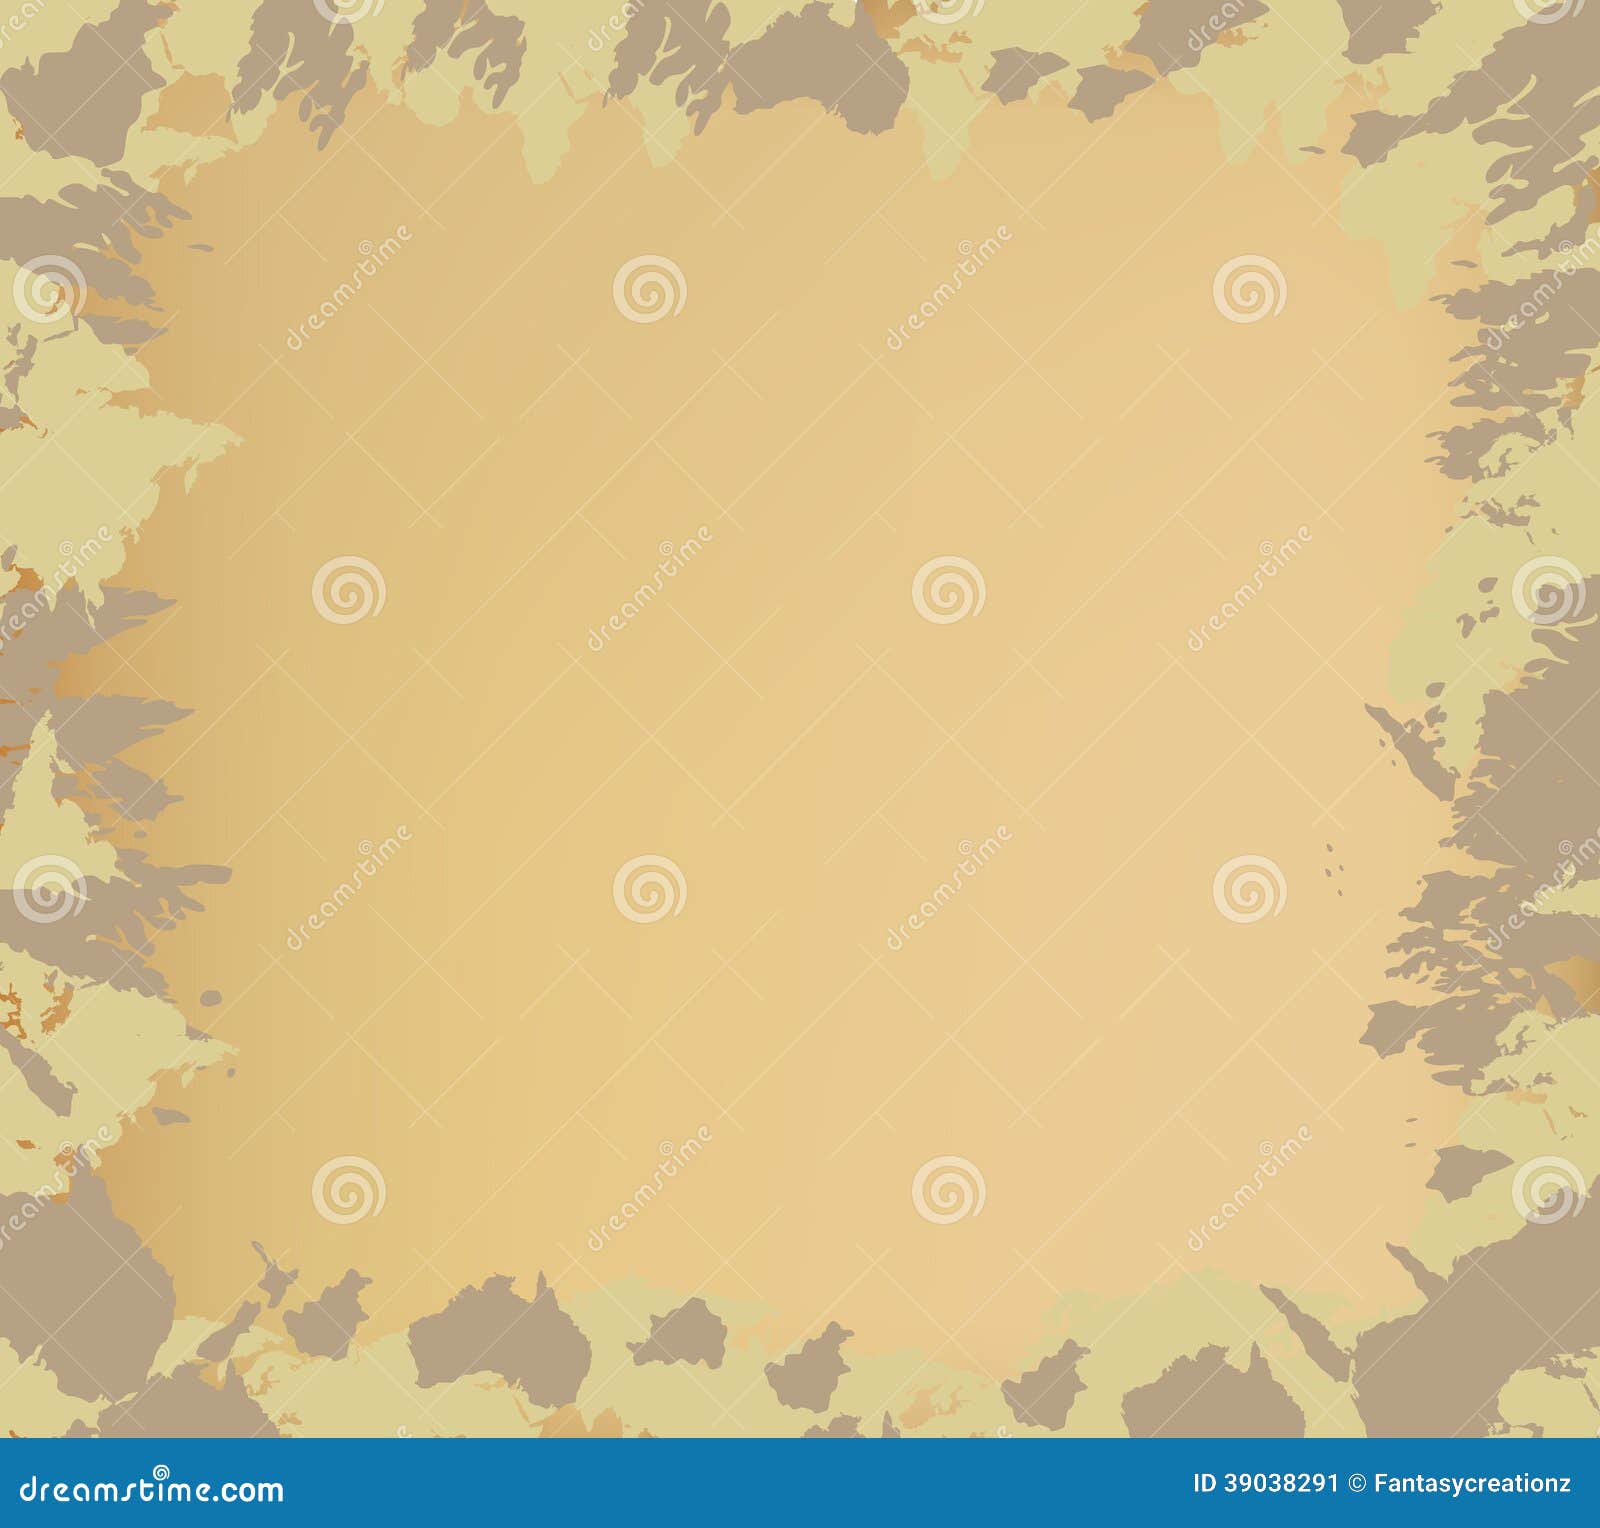 Camouflage frame stock vector. Illustration of fashion - 39038291